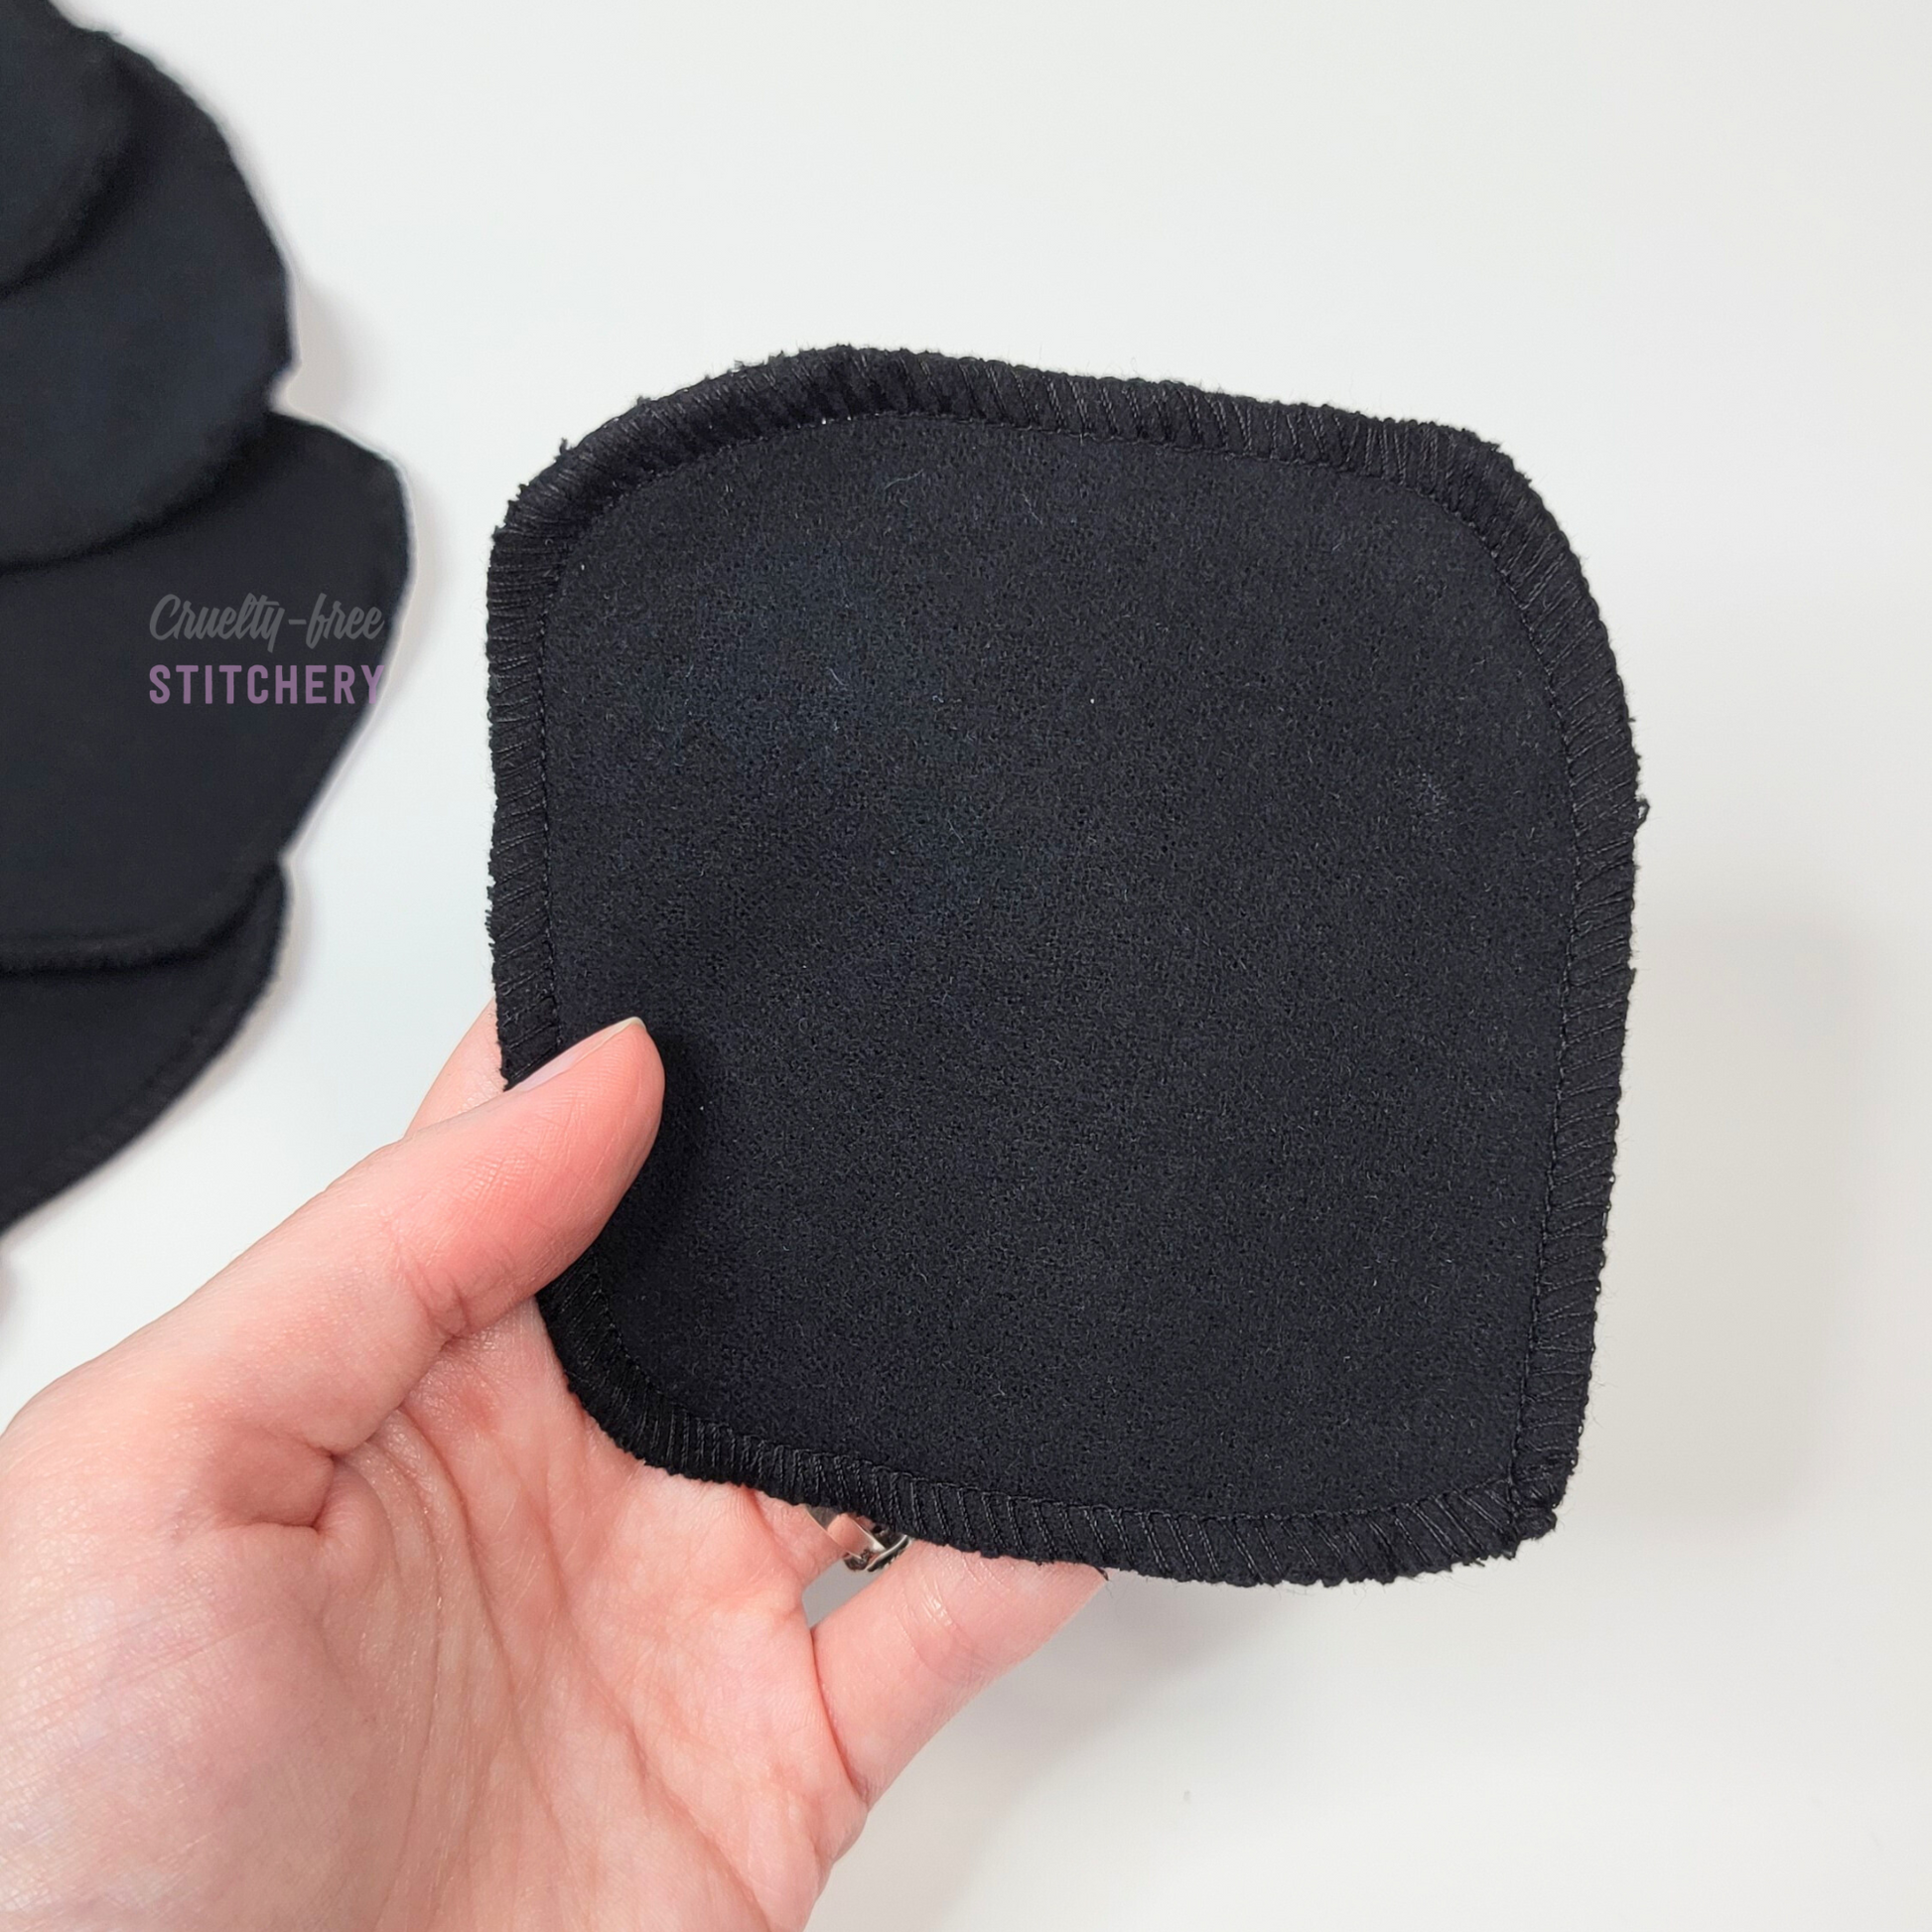 A black reusable cotton round in my hand to show the size. They are larger than a regular disposable cotton round.